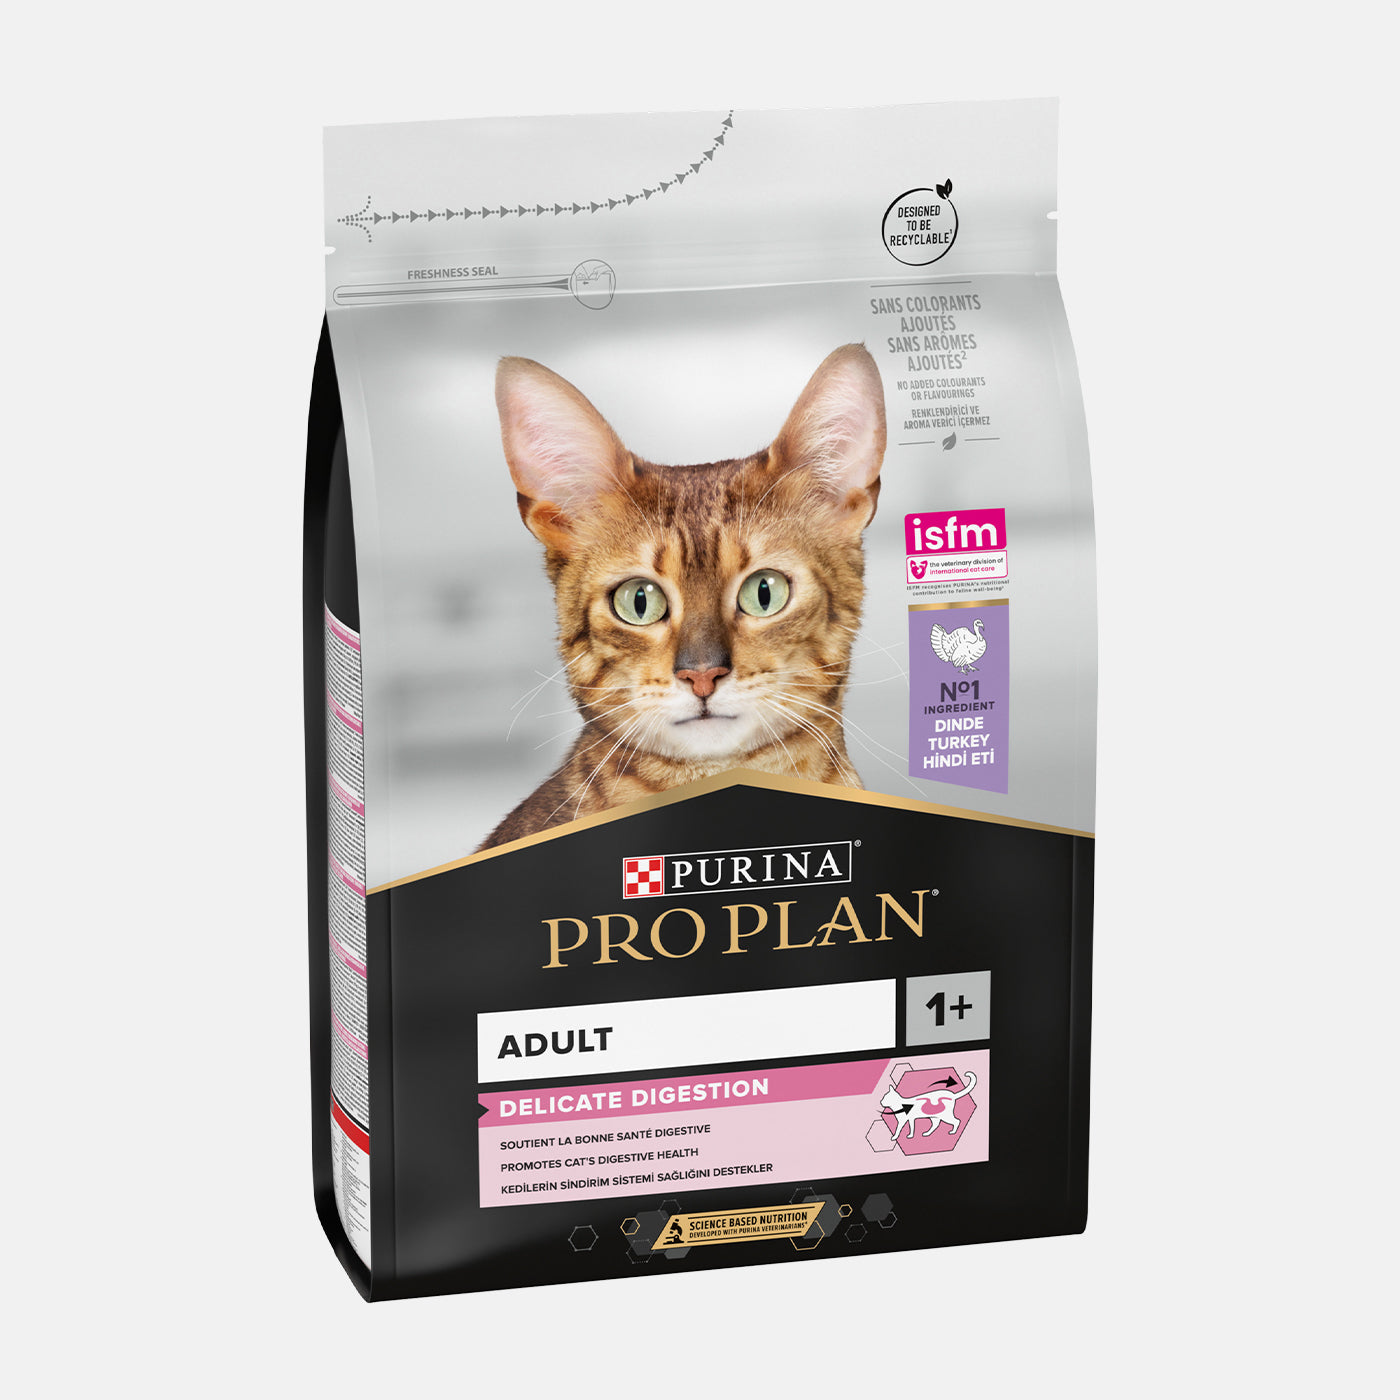 PRO PLAN Cat Adult Delicate Digestion with Turkey Dry Food 3KG